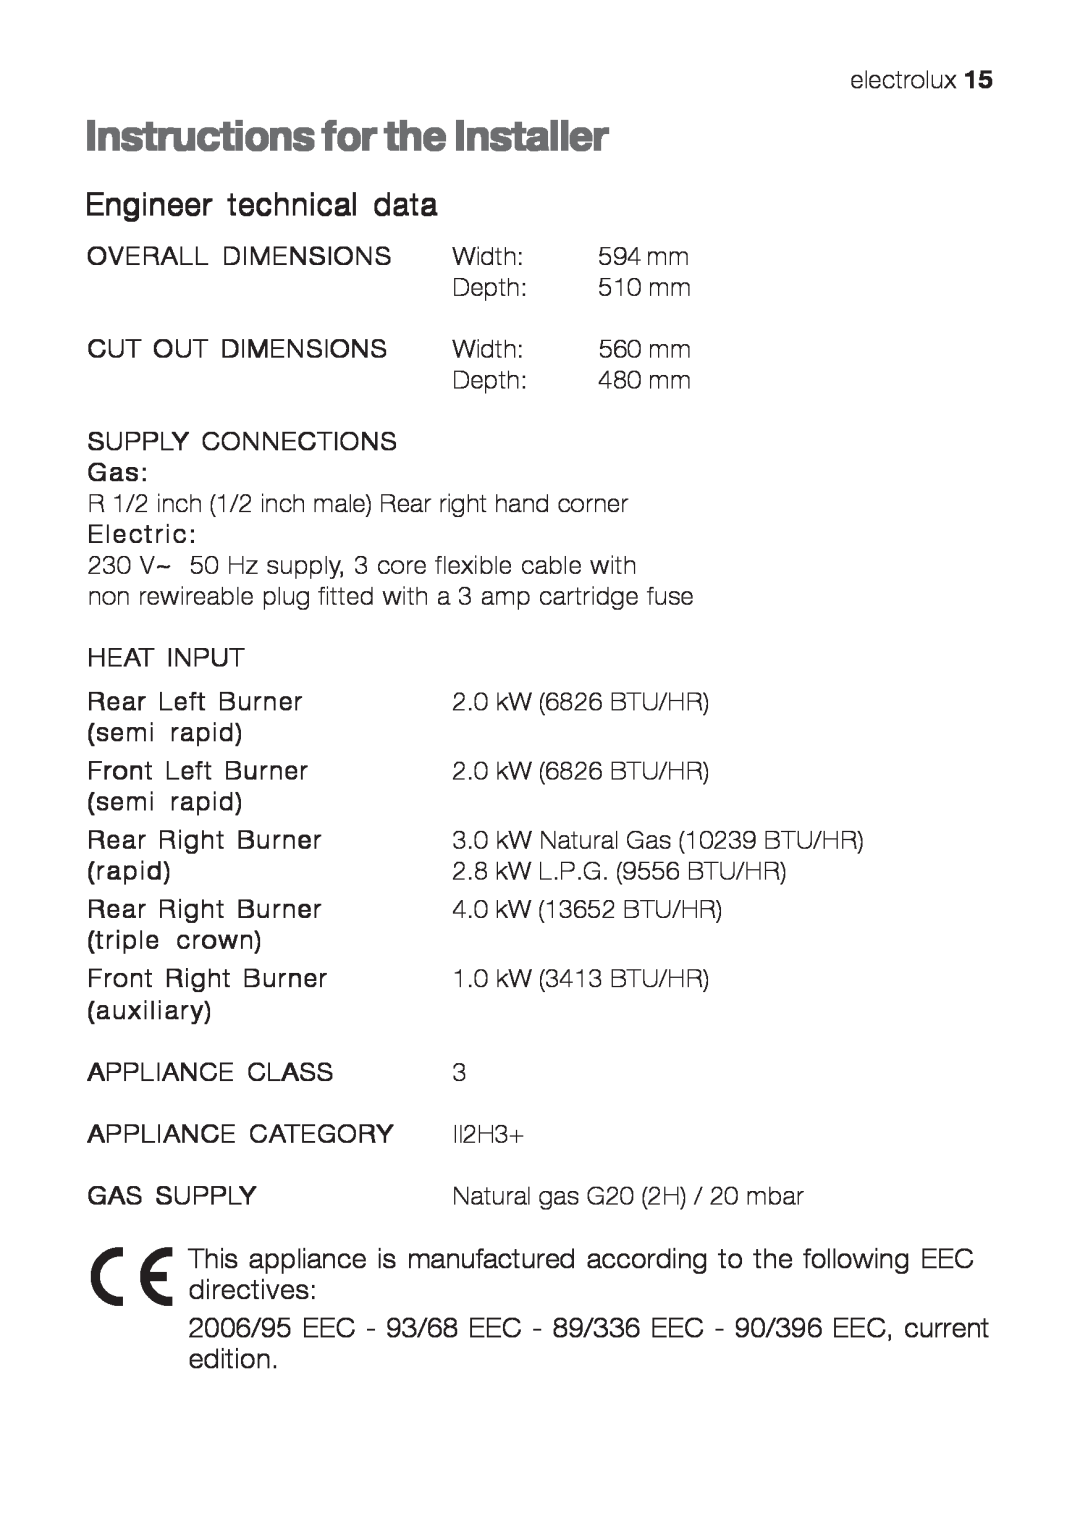 Electrolux EHG 641 Instructions for the Installer, Engineer technical data, Overall Dimensions, Cut Out Dimensions, rapid 